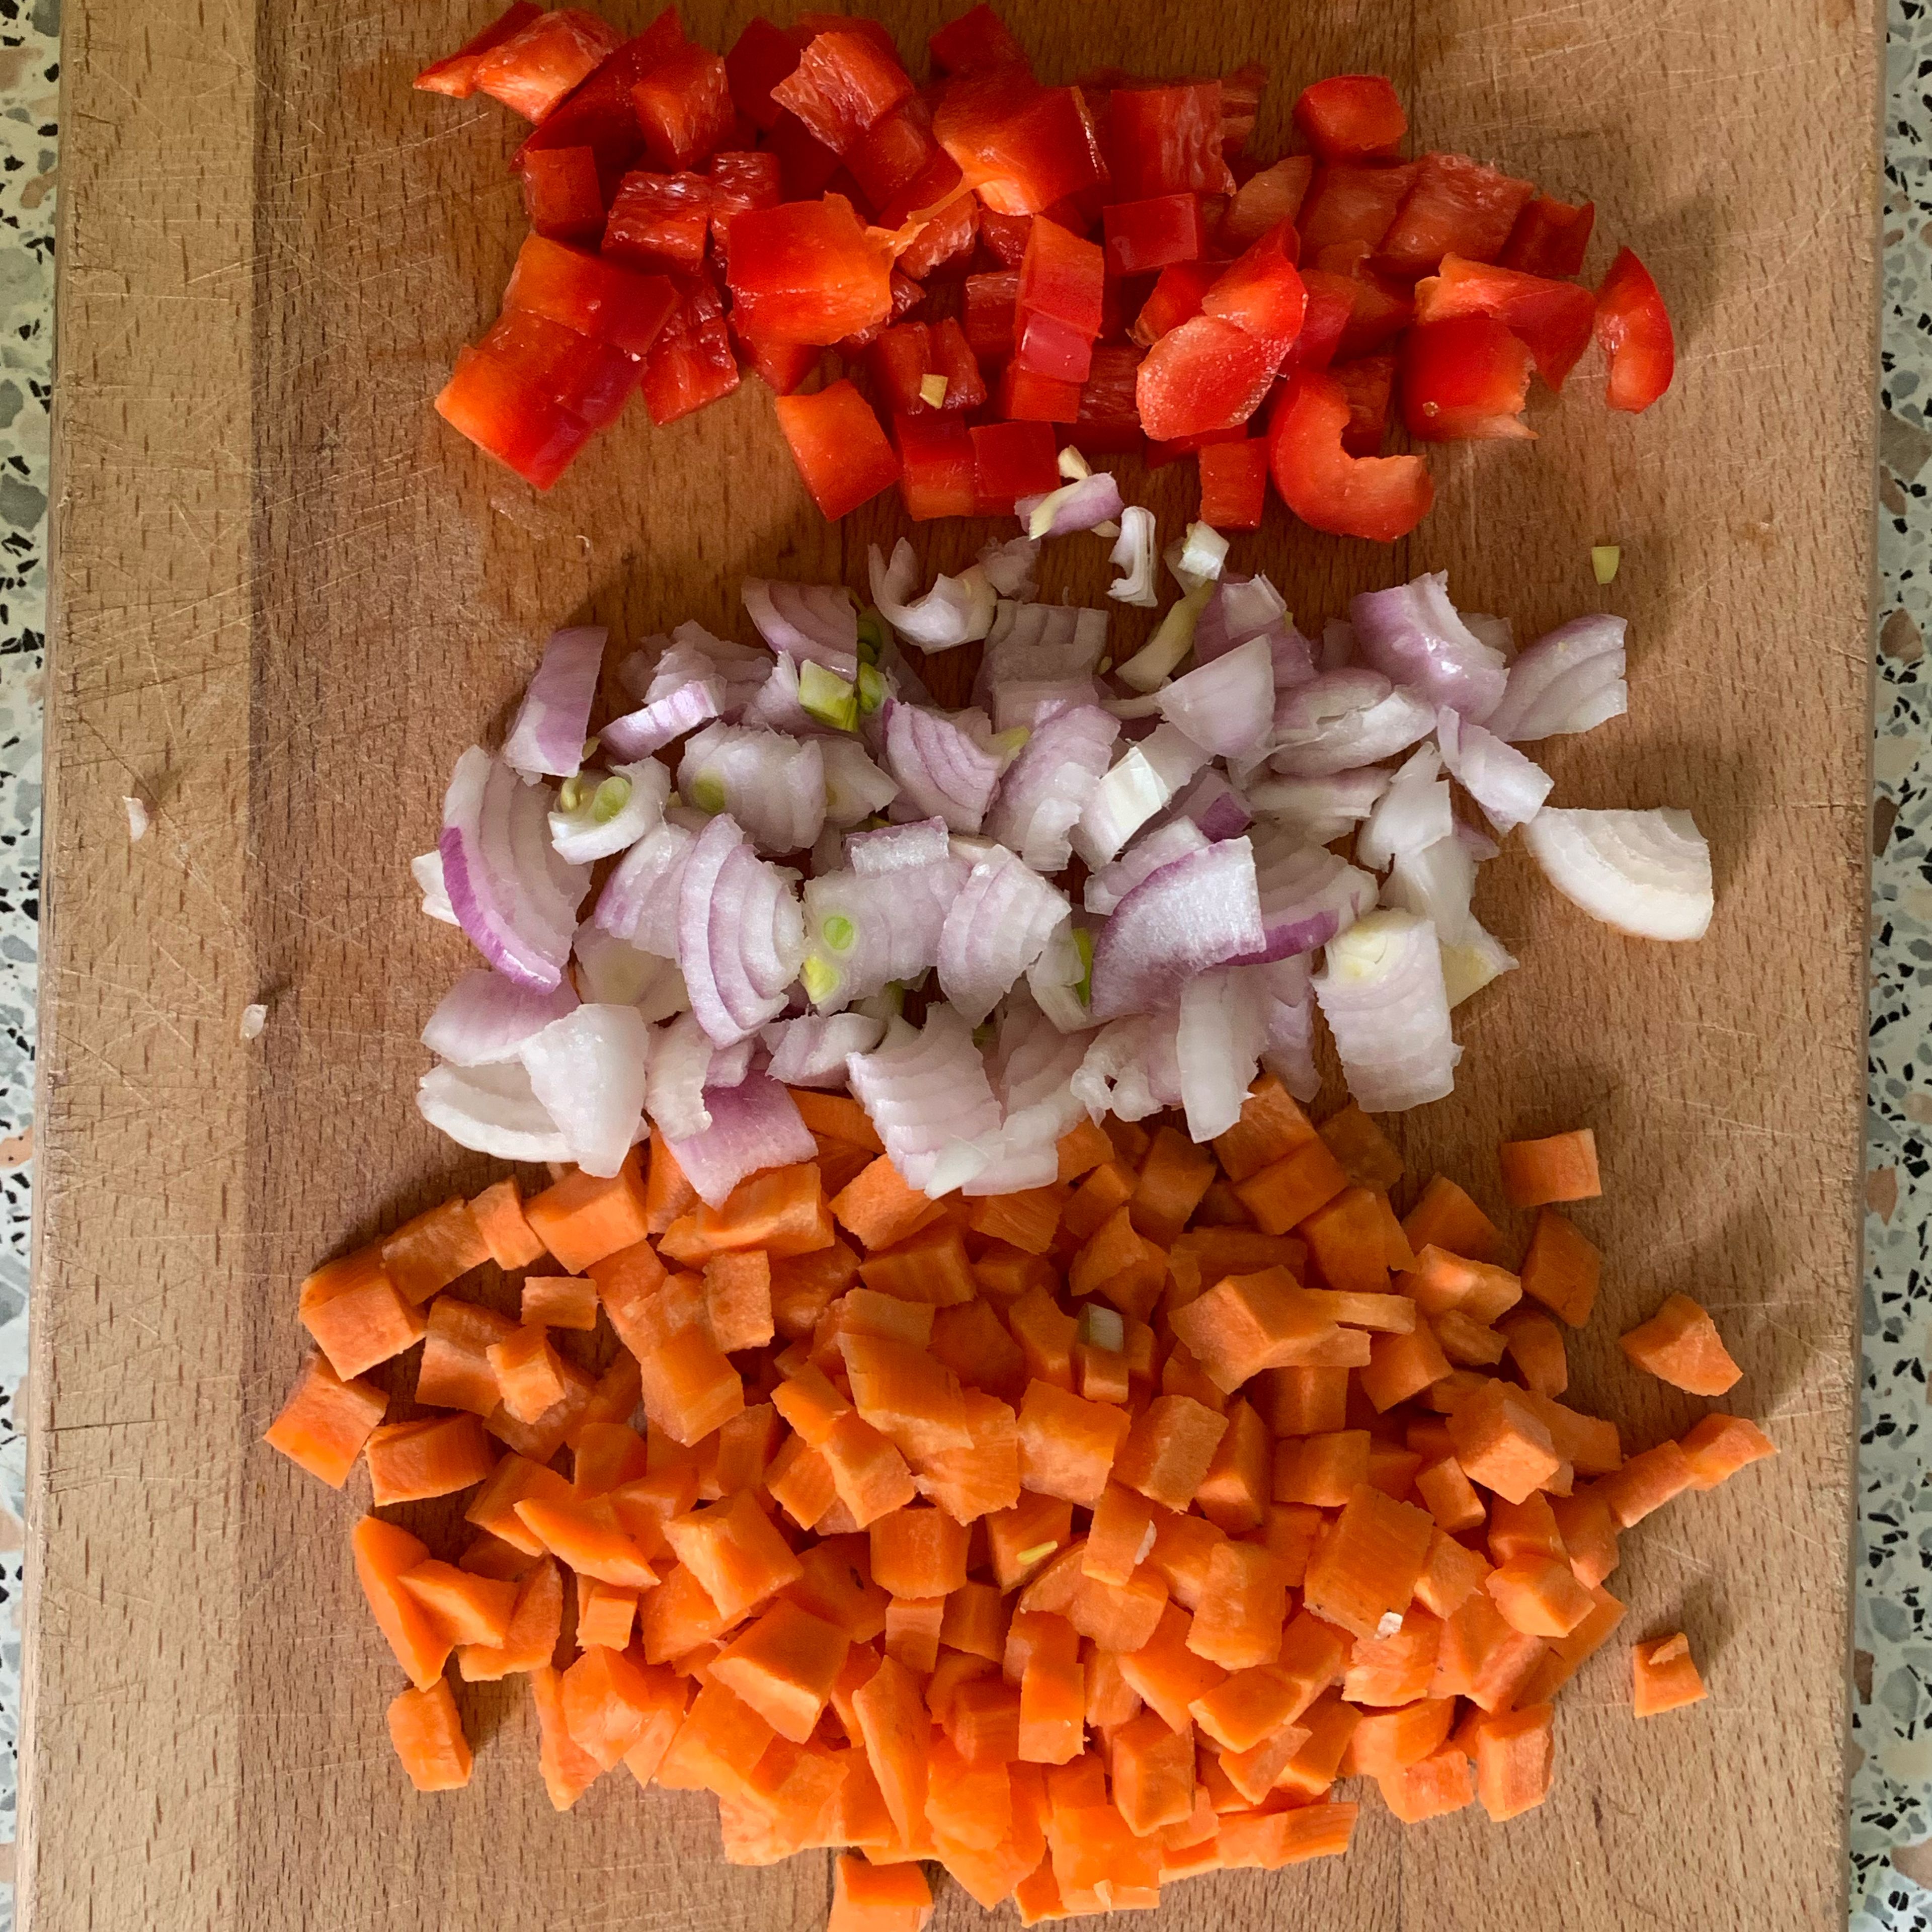 While boiling beans, chop onions, sweet pepper, carrot ( I prefer mini cubes).